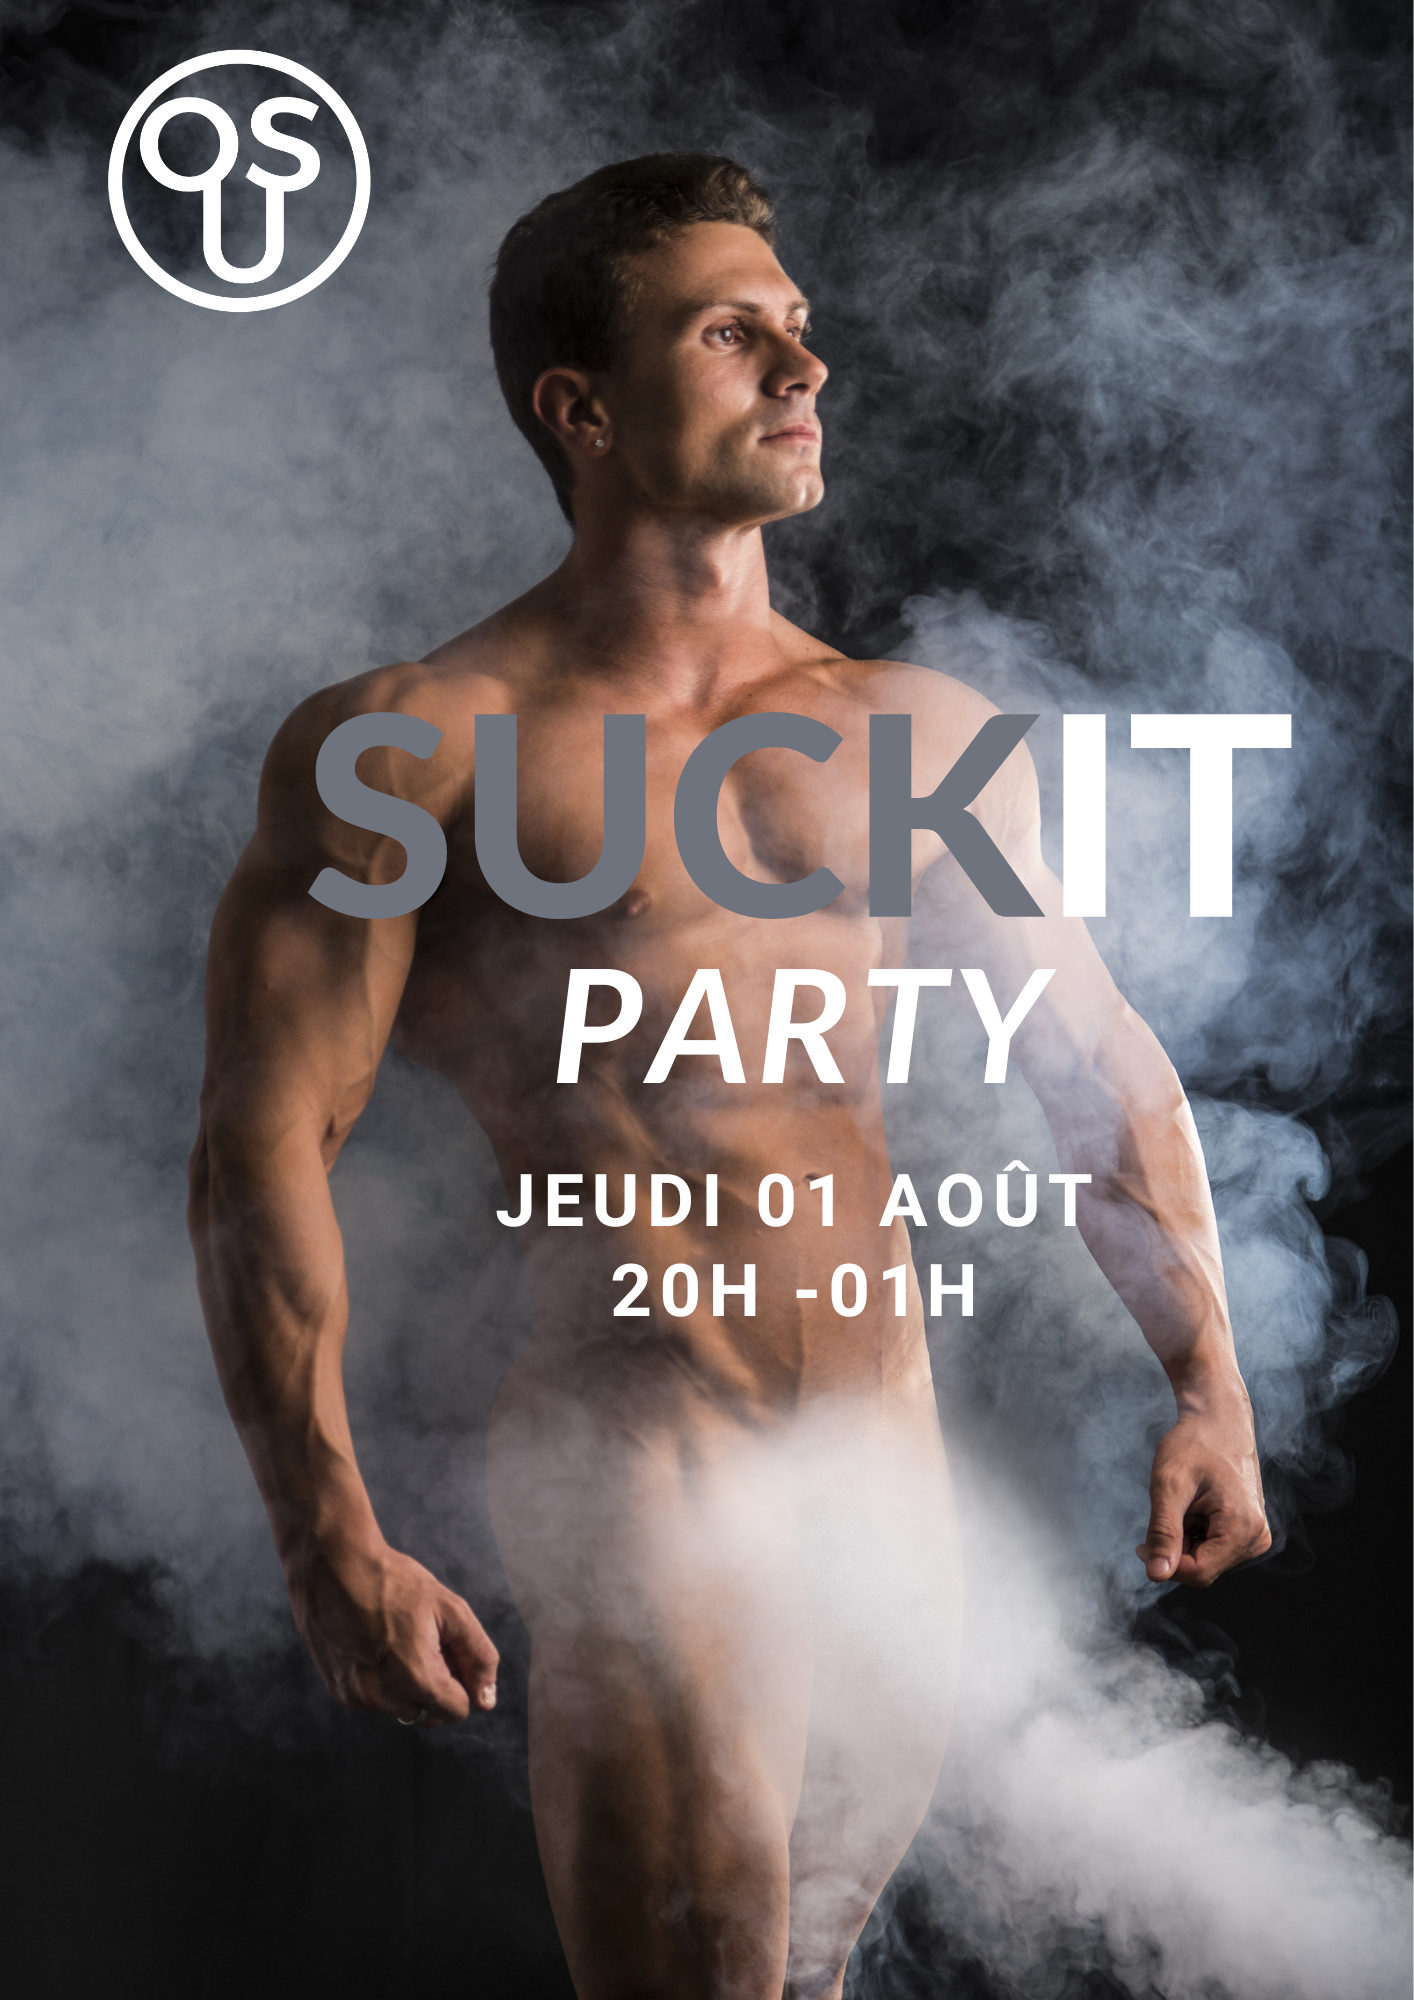 Suckit Party